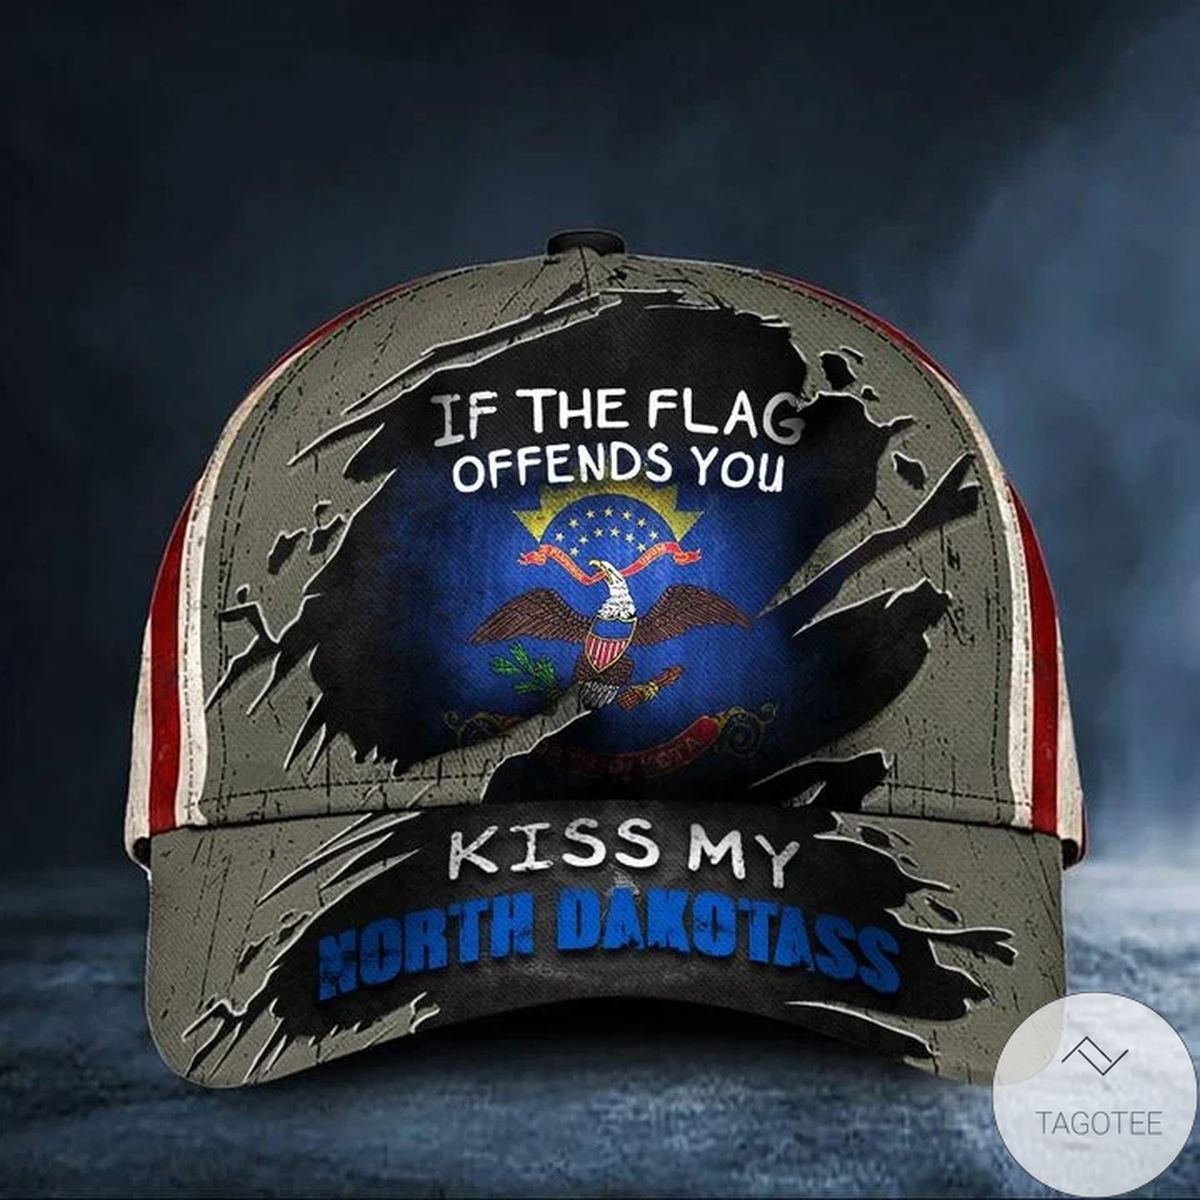 If The Flag Offends You Kiss My North Dakotass Cap USA Flag Hat Unique Gift For Bro Friends